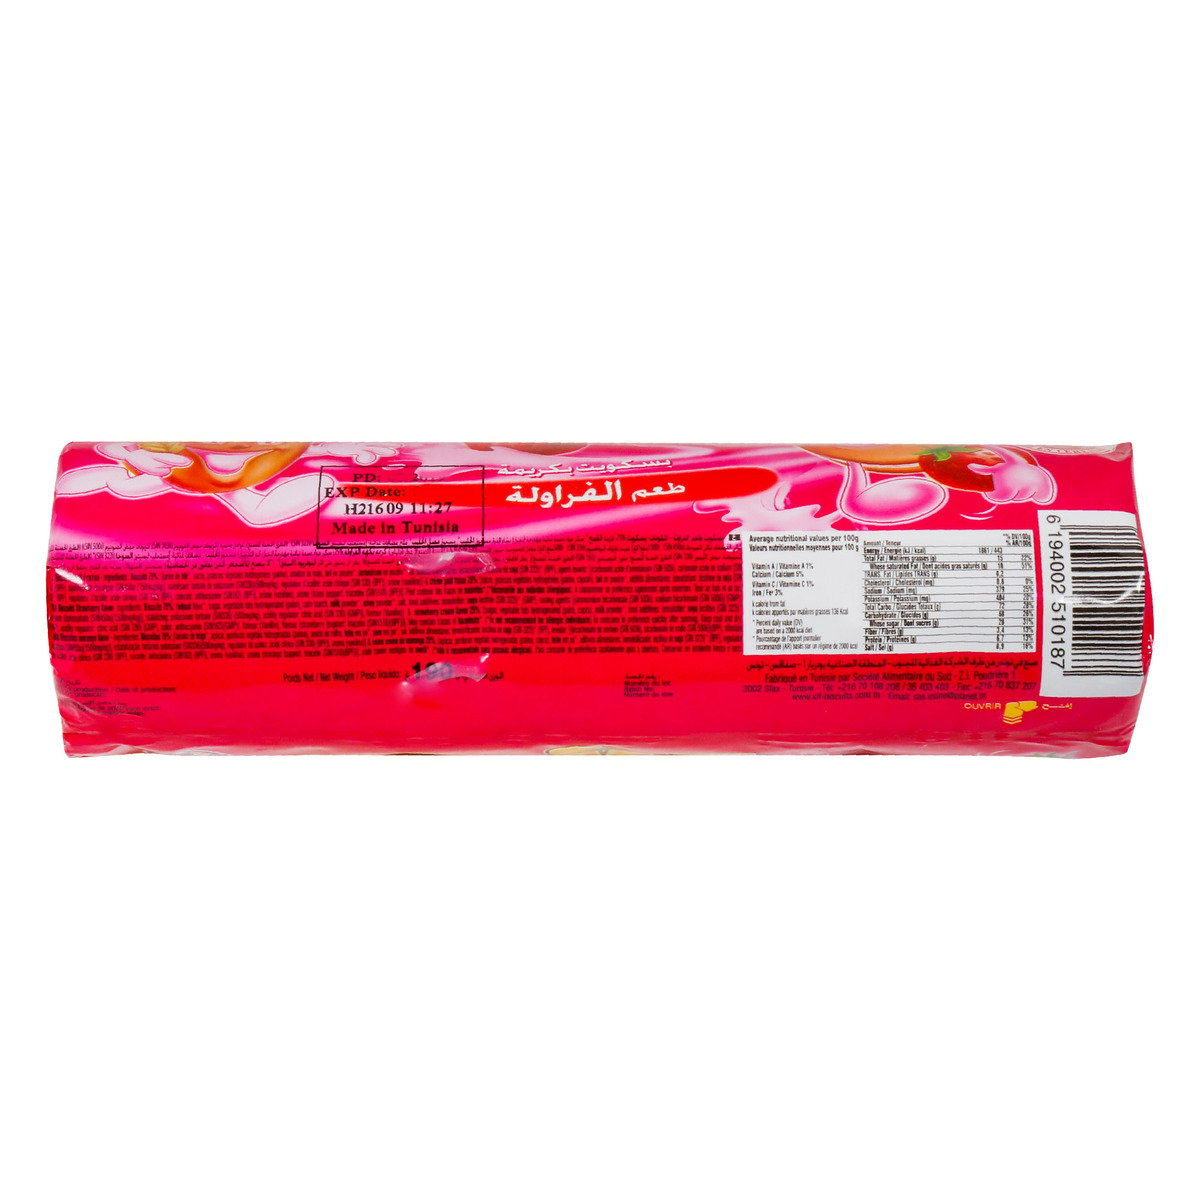 Smile Cream Biscuit with Strawberry Flavor 190g